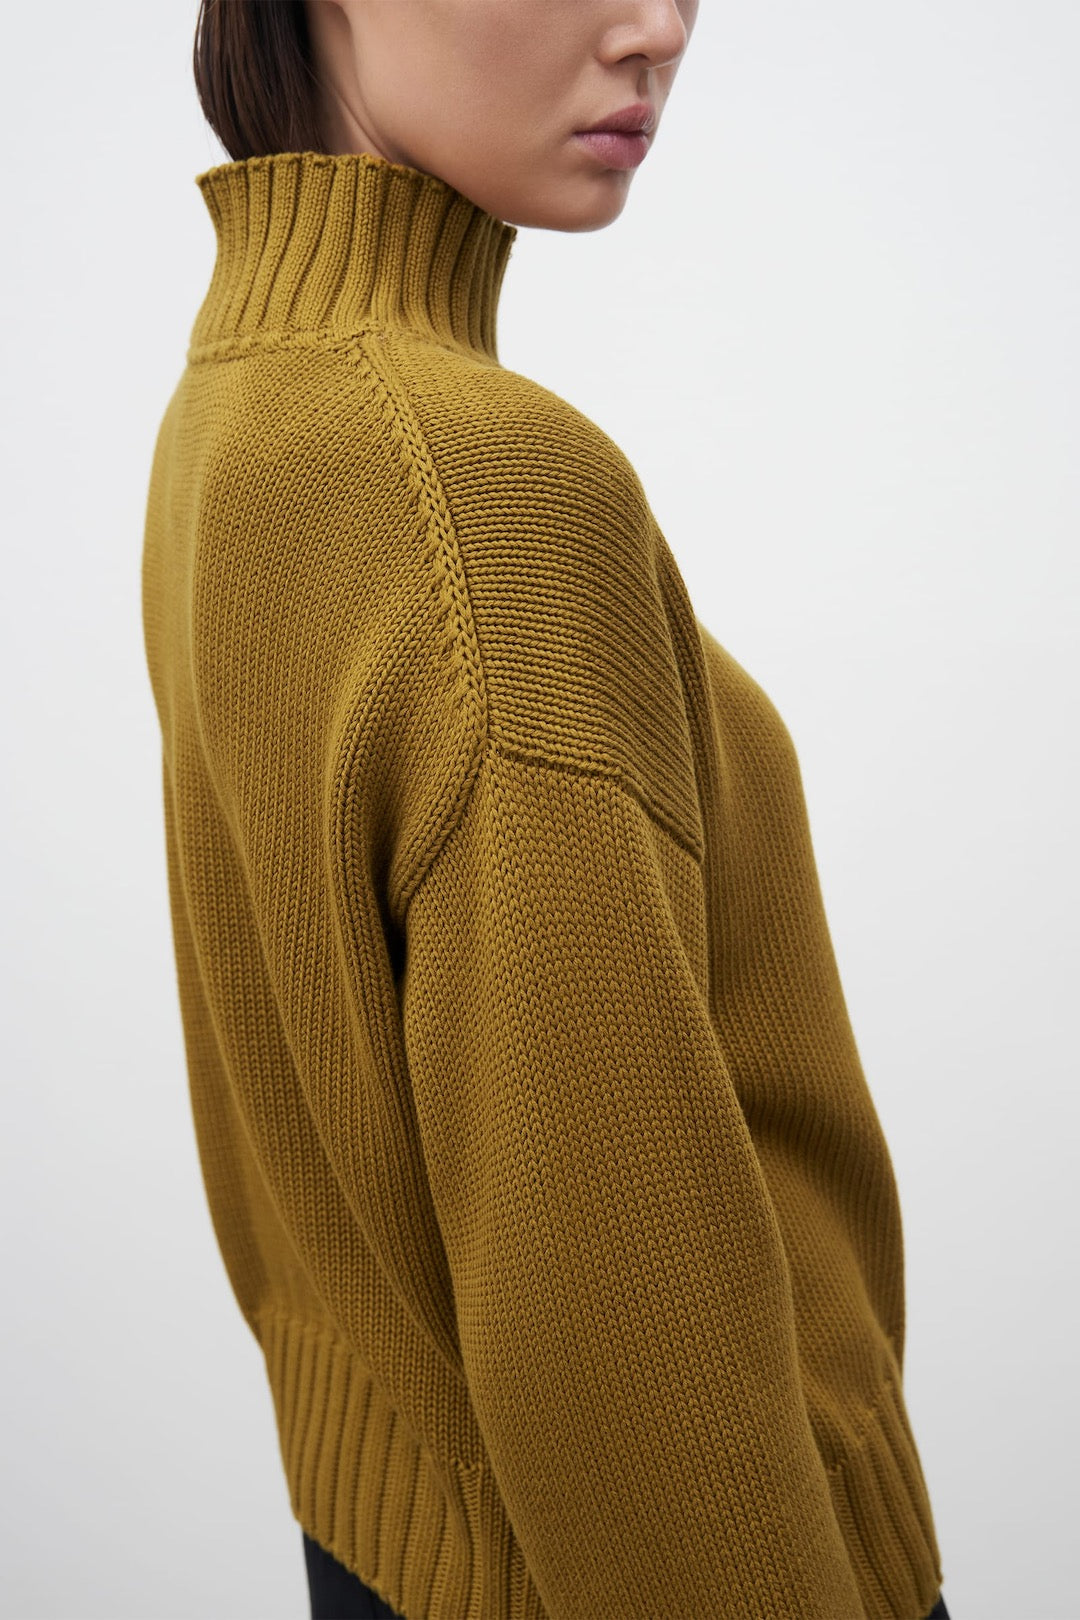 The back view of a woman wearing a Kowtow Staple Sweater – Chartreuse.